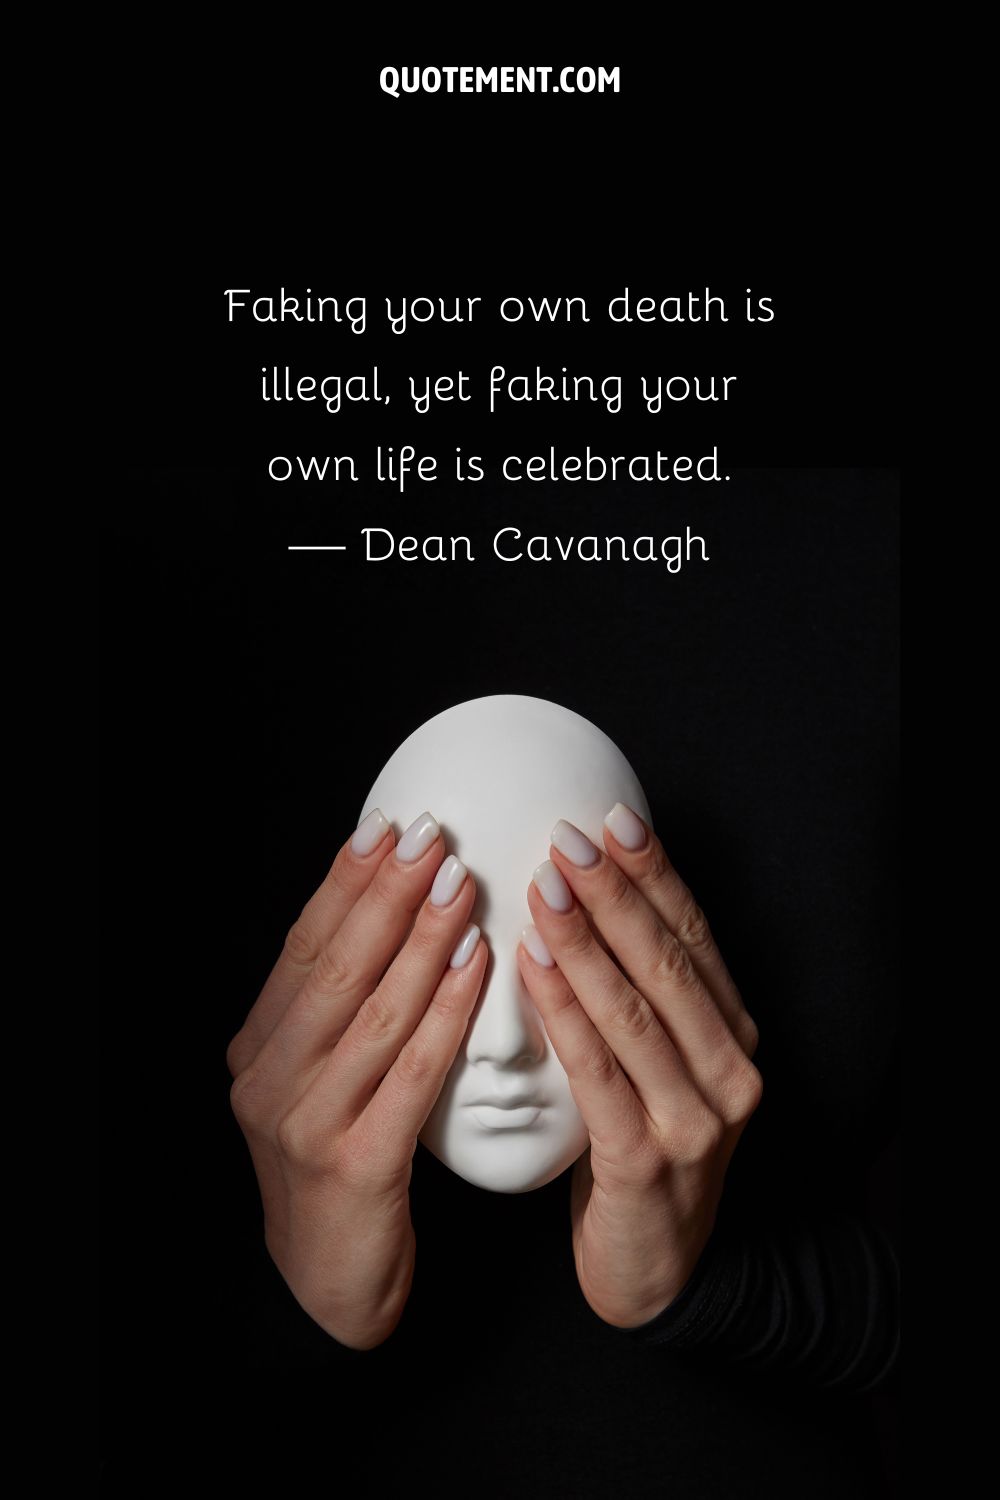 Faking your own death is illegal, yet faking your own life is celebrated